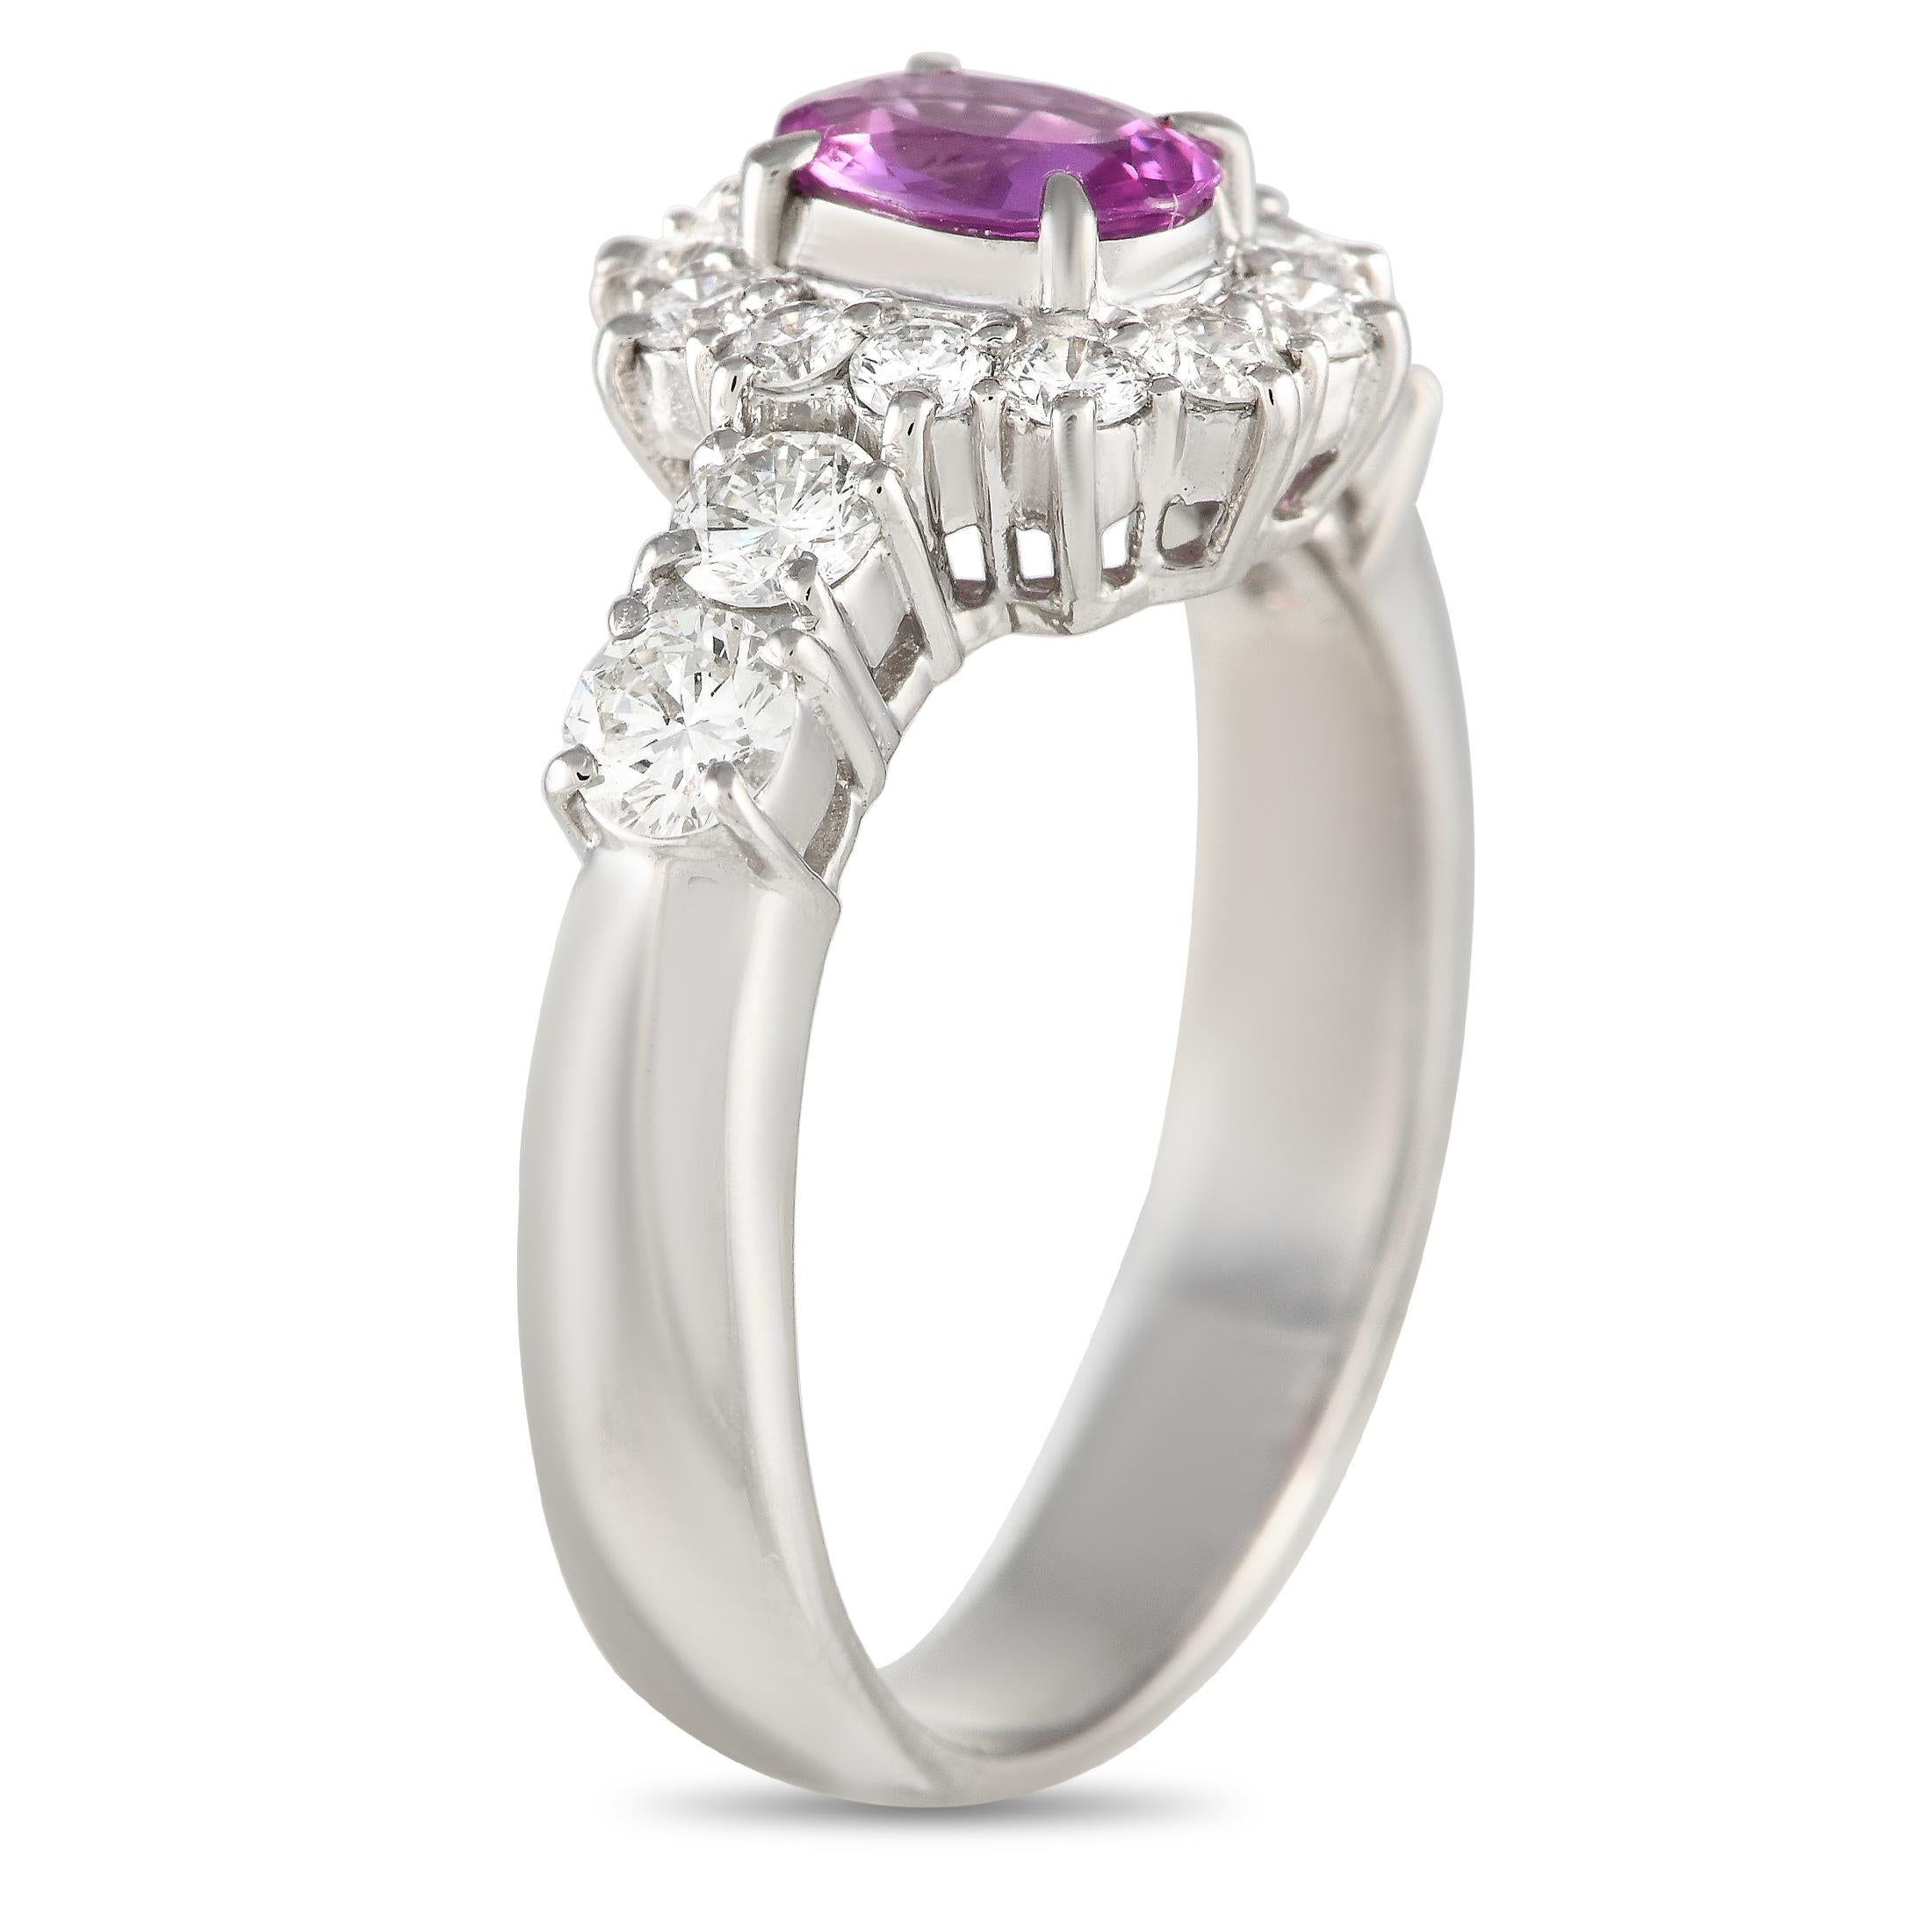 This ring can easily make any lady's heart skip a beat. It features a platinum band gleaming with enduring elegance. The shoulders are traced wtih diamonds on pronged baskets, leading to a captivating 0.51-carat pink sapphire centerstone.